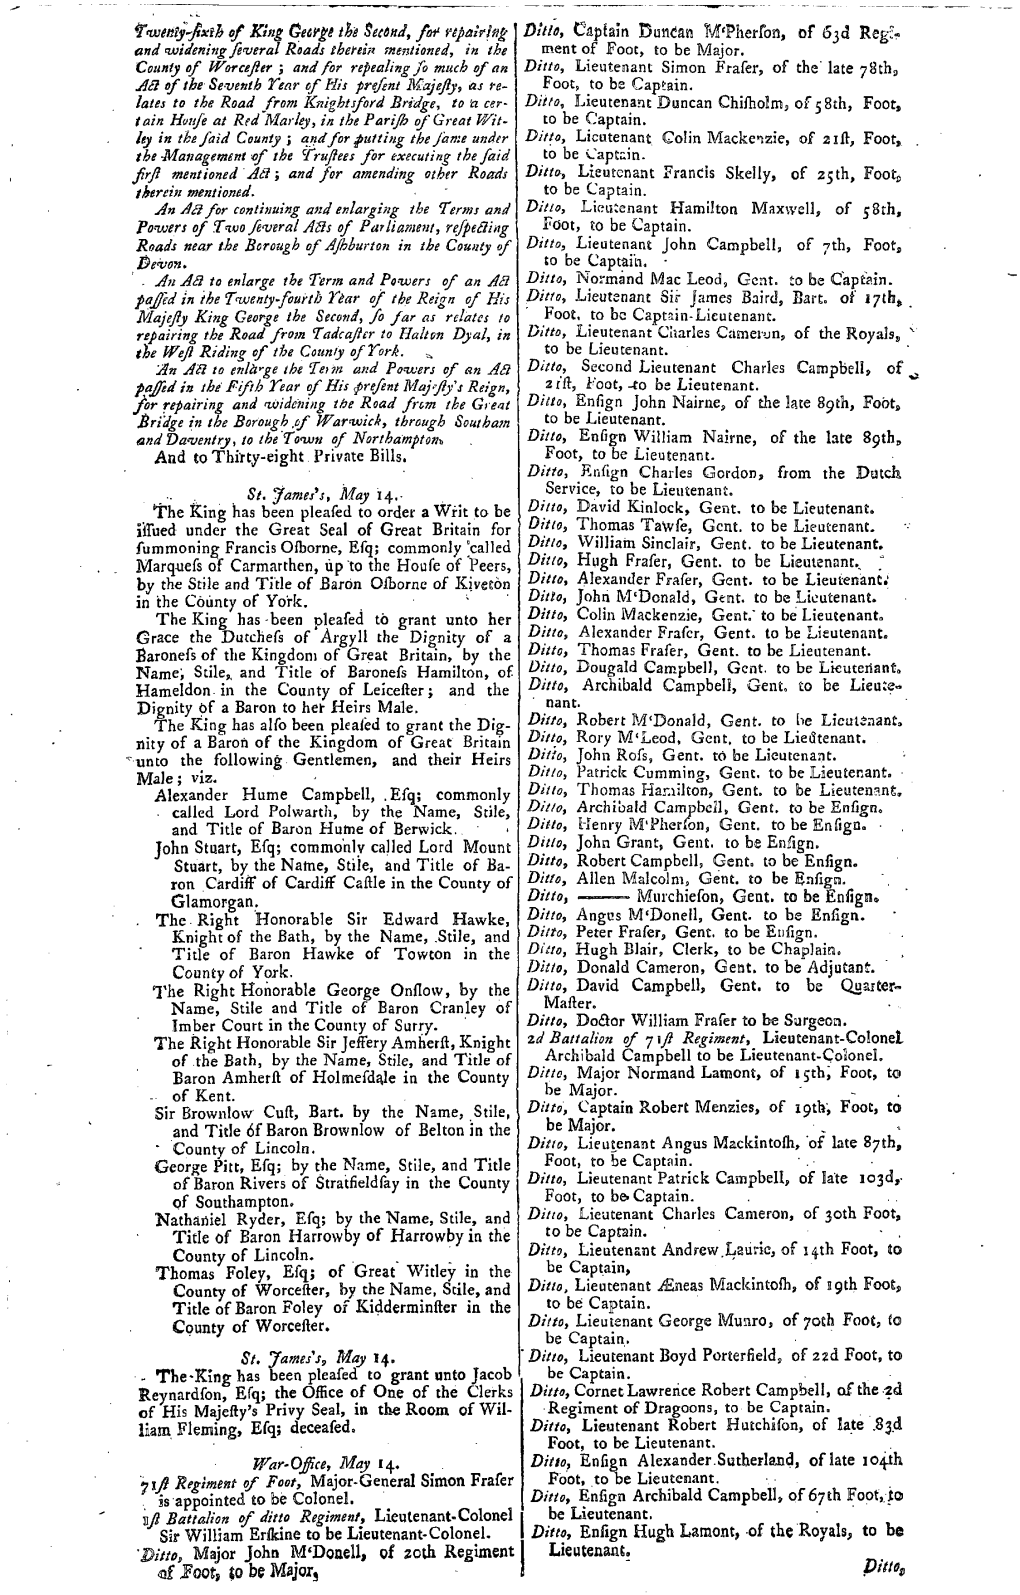 The London Gazette, Issue 11665, Page 2